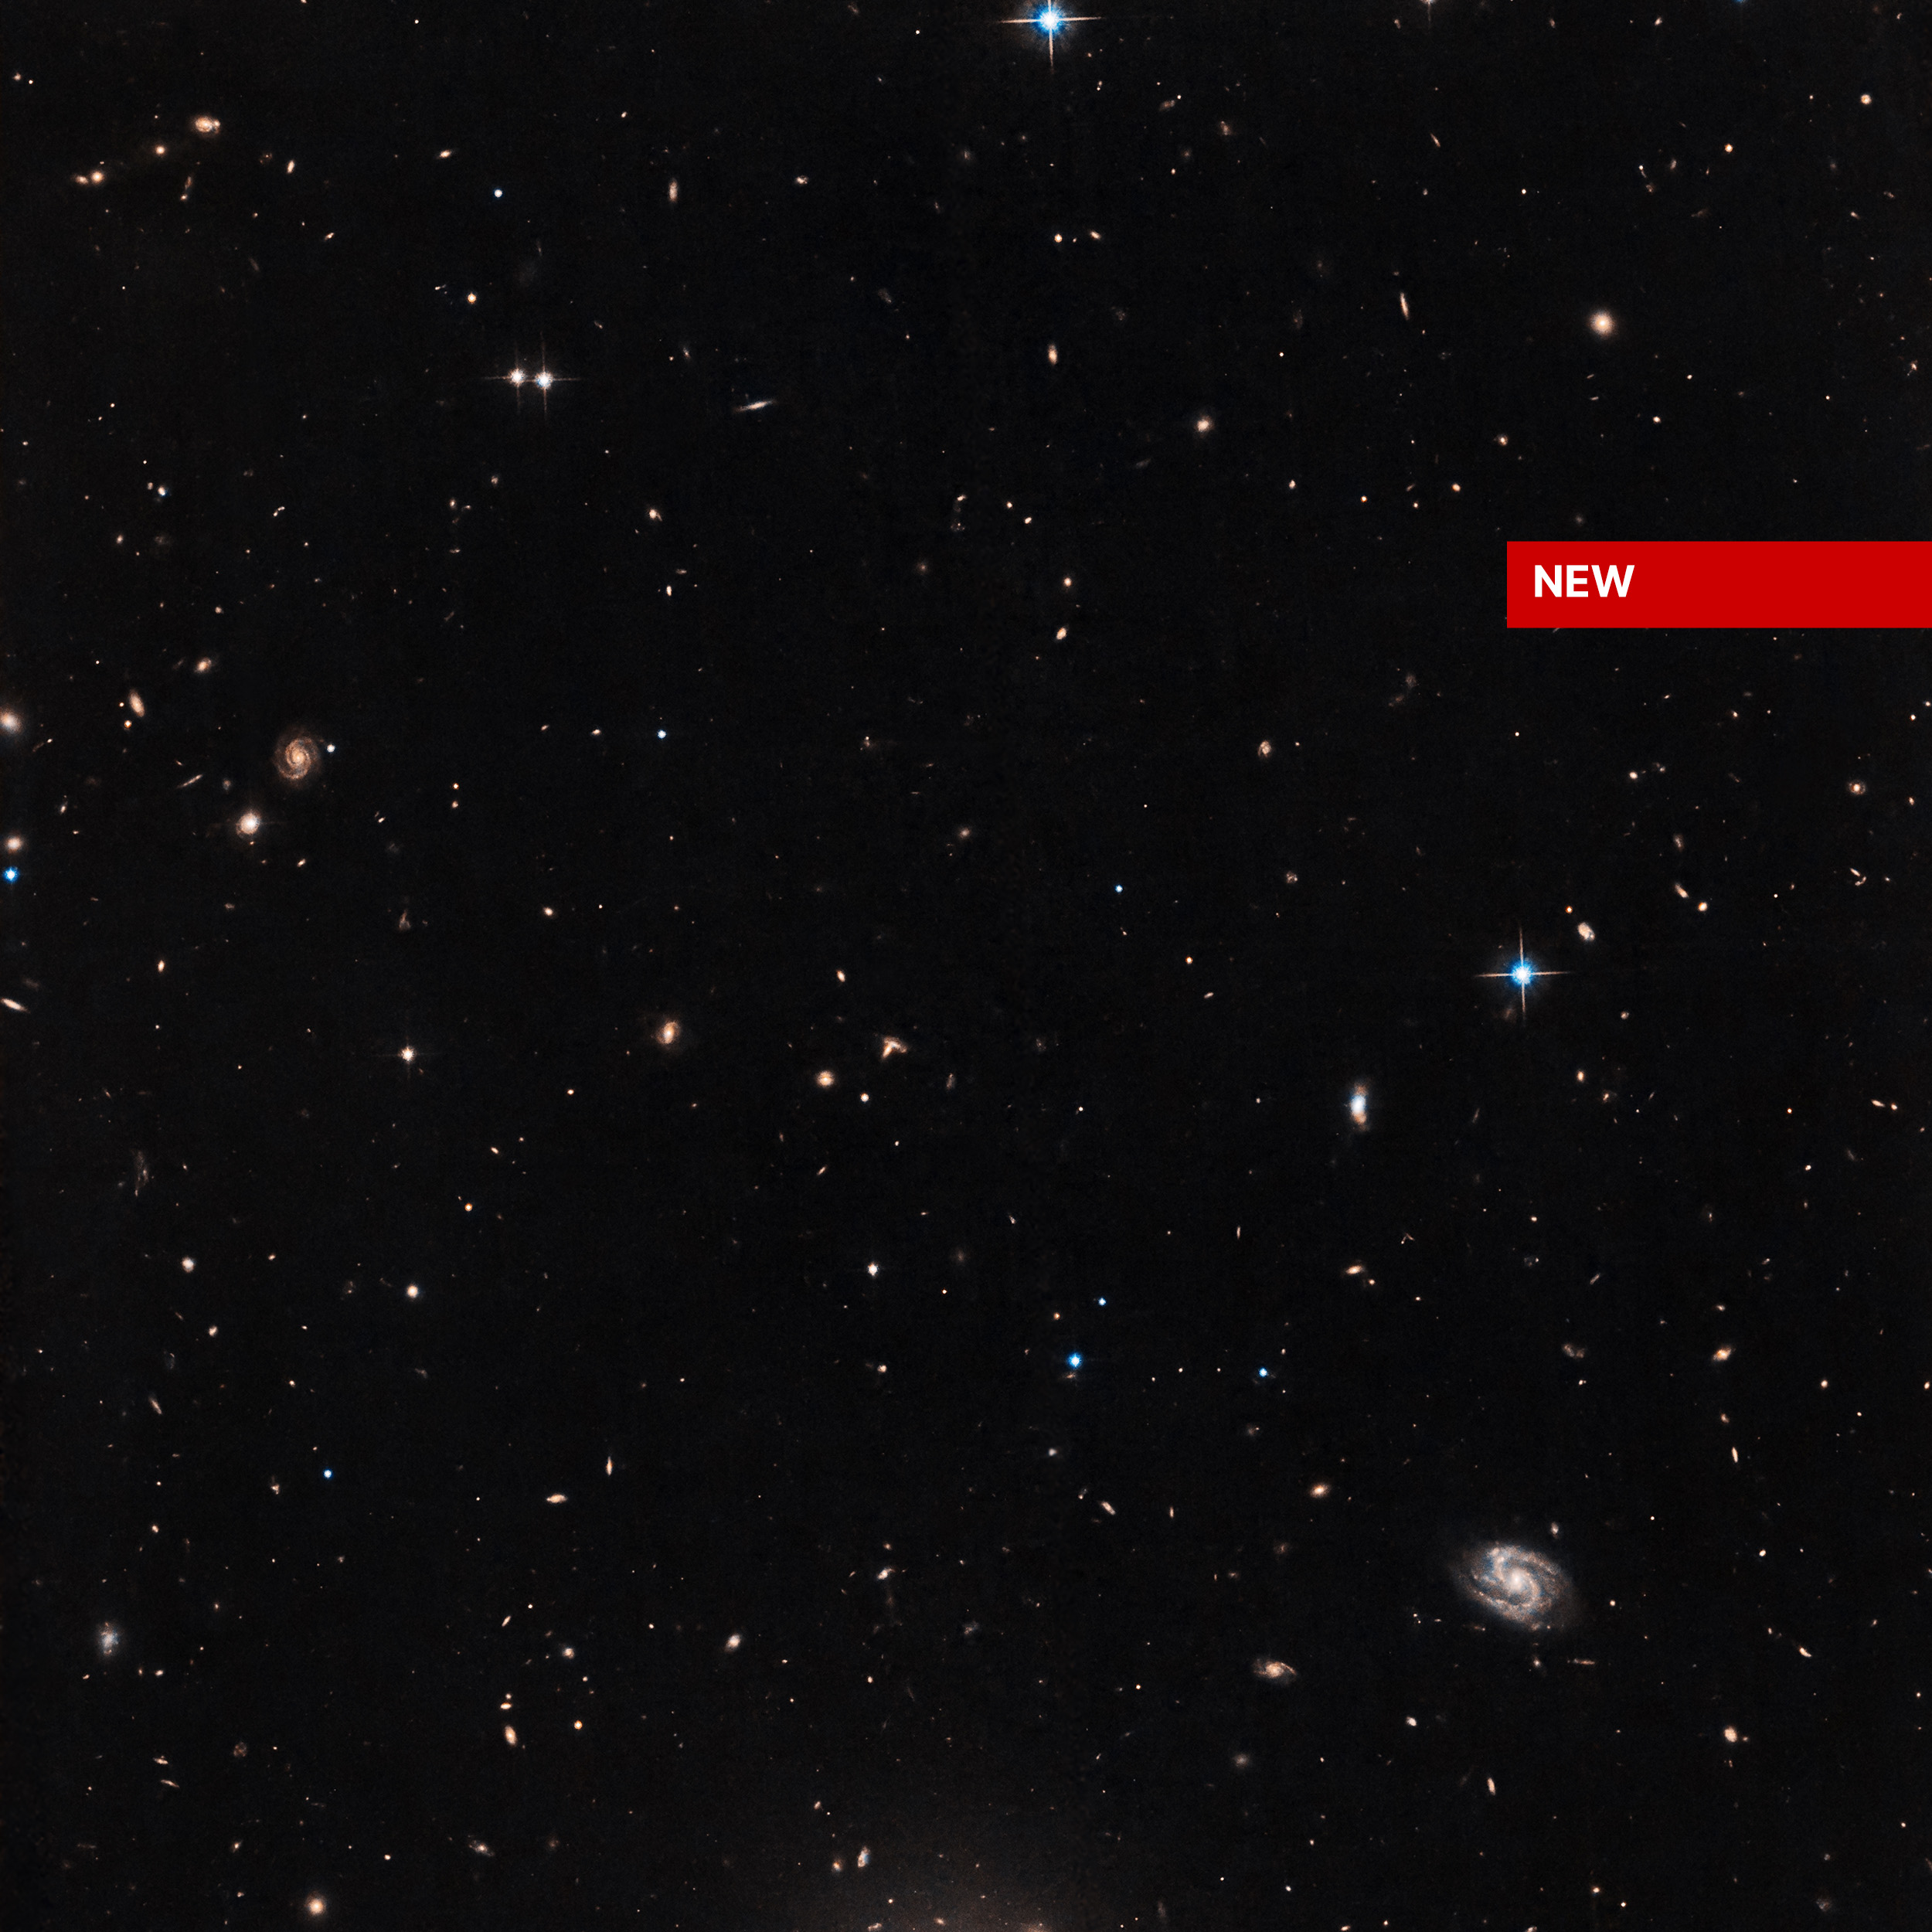 Background galaxies and stars are sprinkled across a black background. Some of the distant galaxies are spirals.